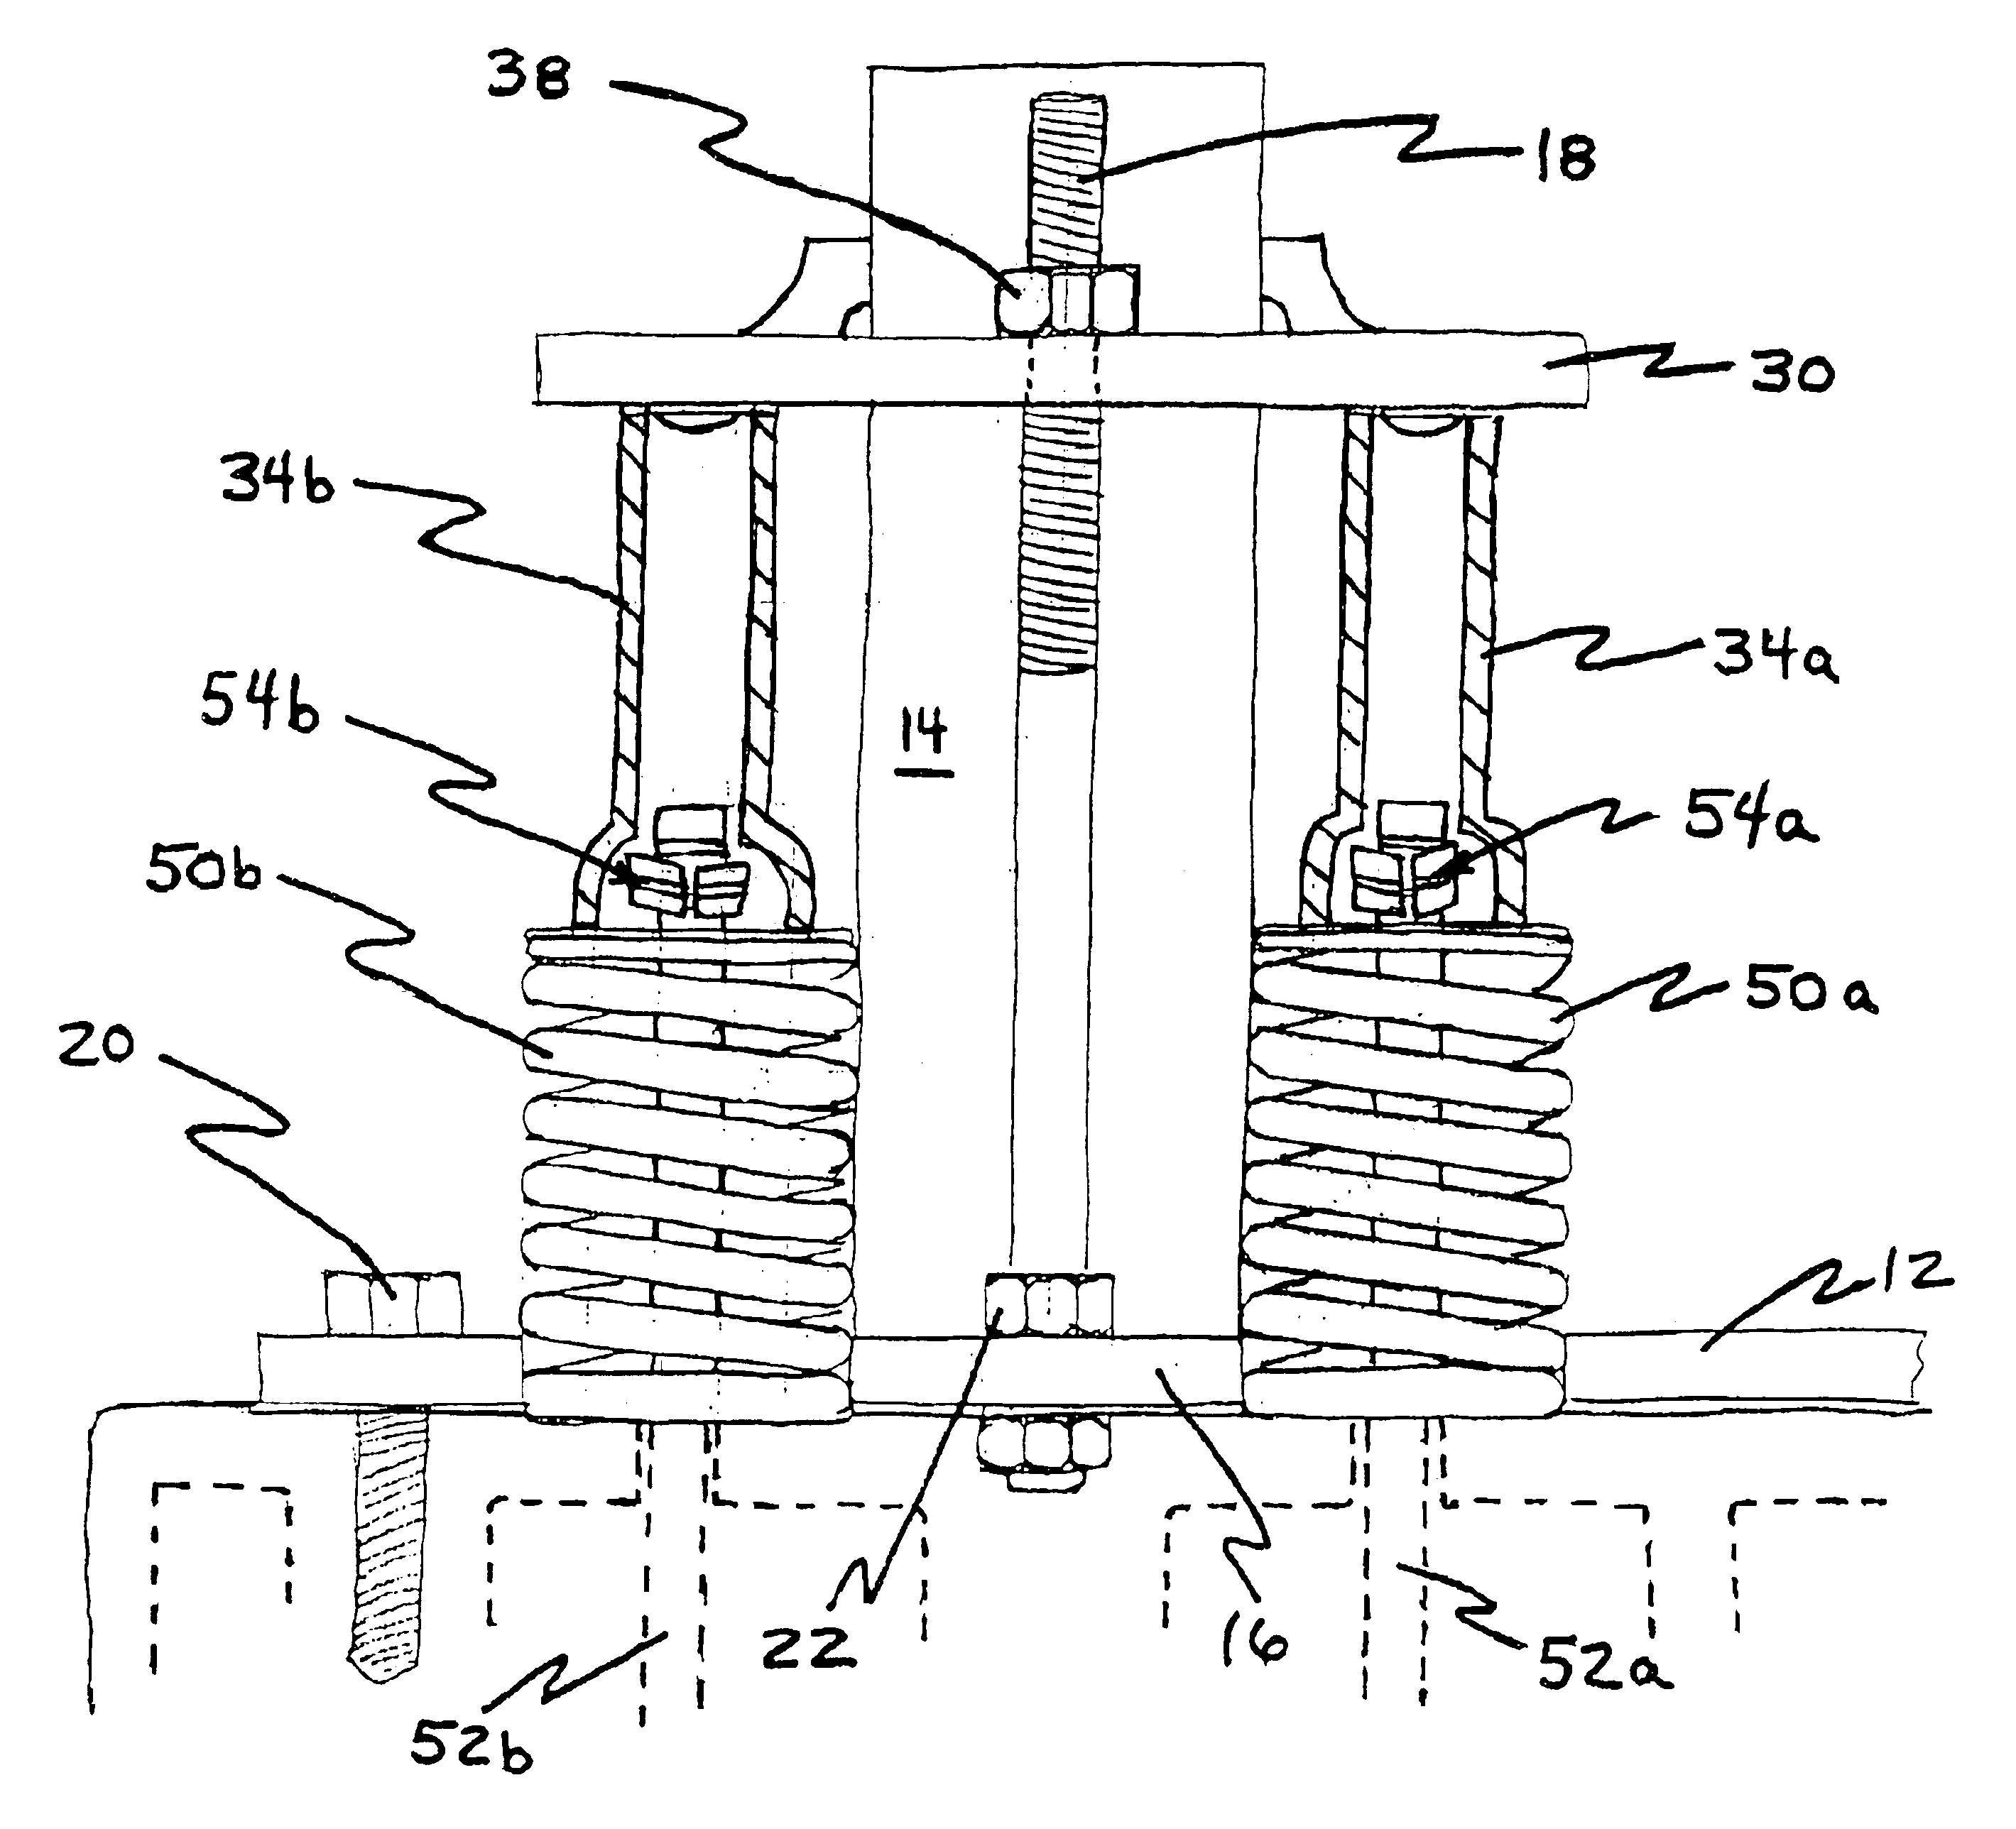 Tool for facilitating the removal and replacement of engine valve stem springs and seals